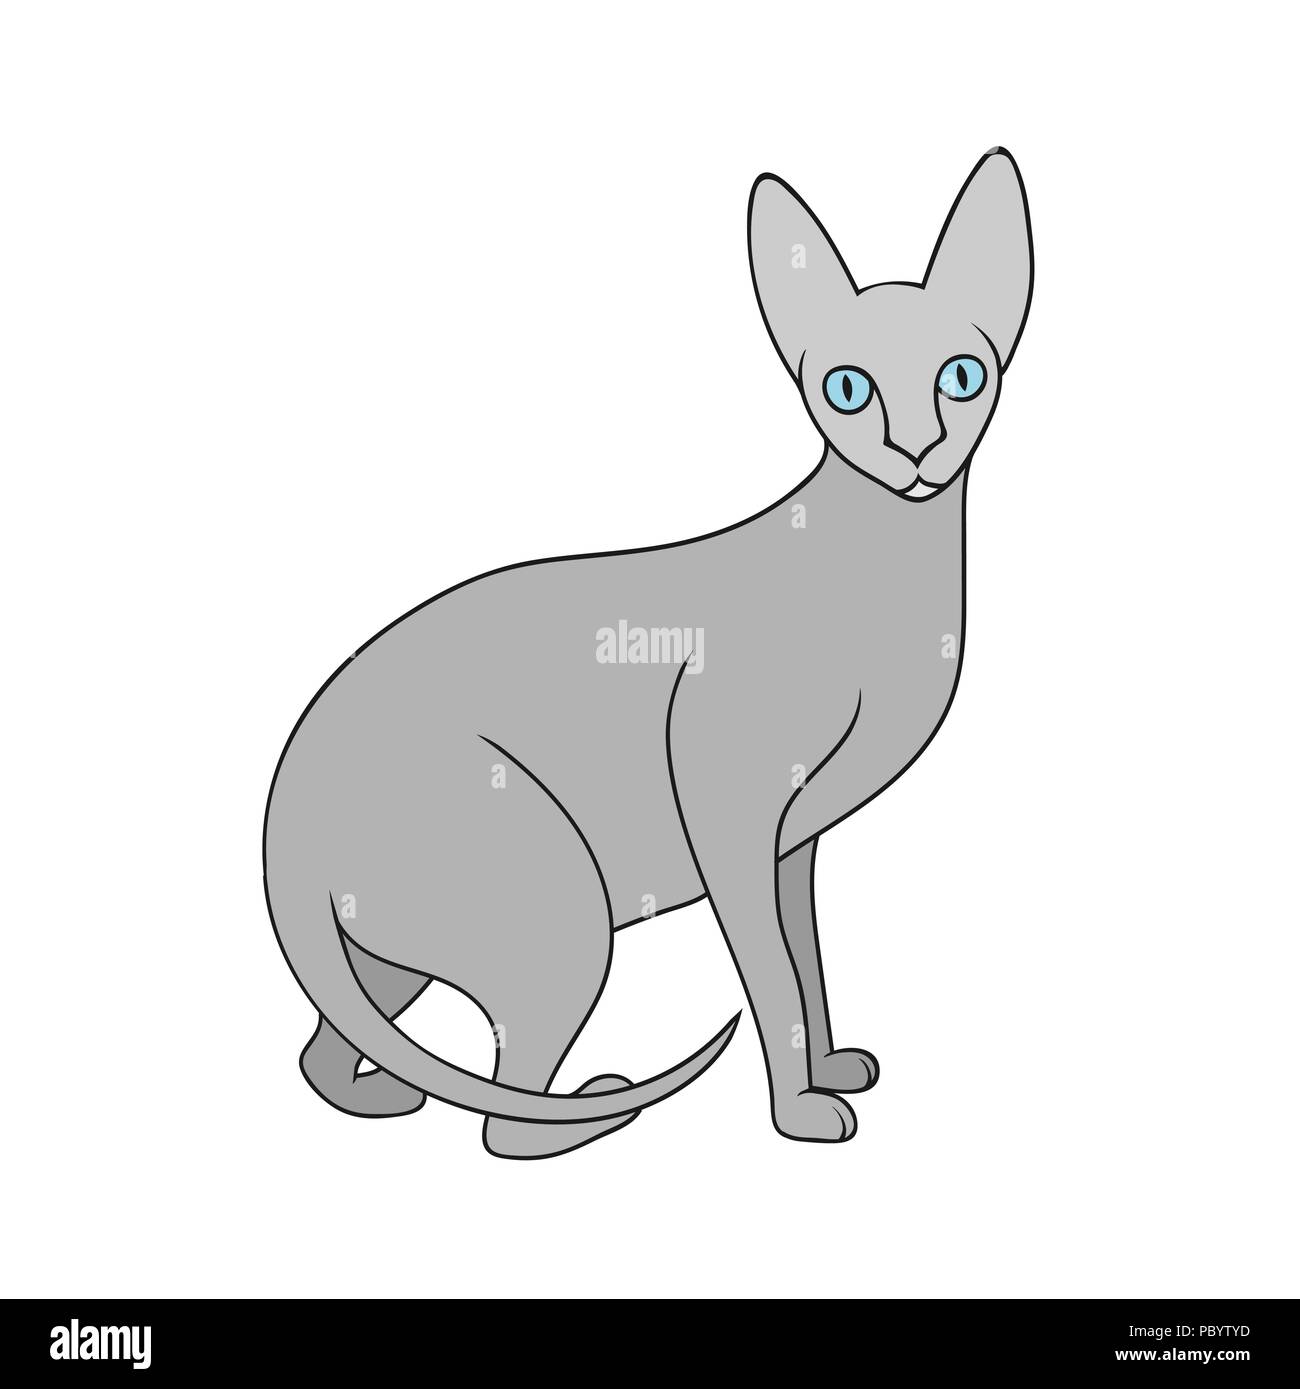 Catisolatedonwhite High Resolution Stock Photography and Images - Alamy